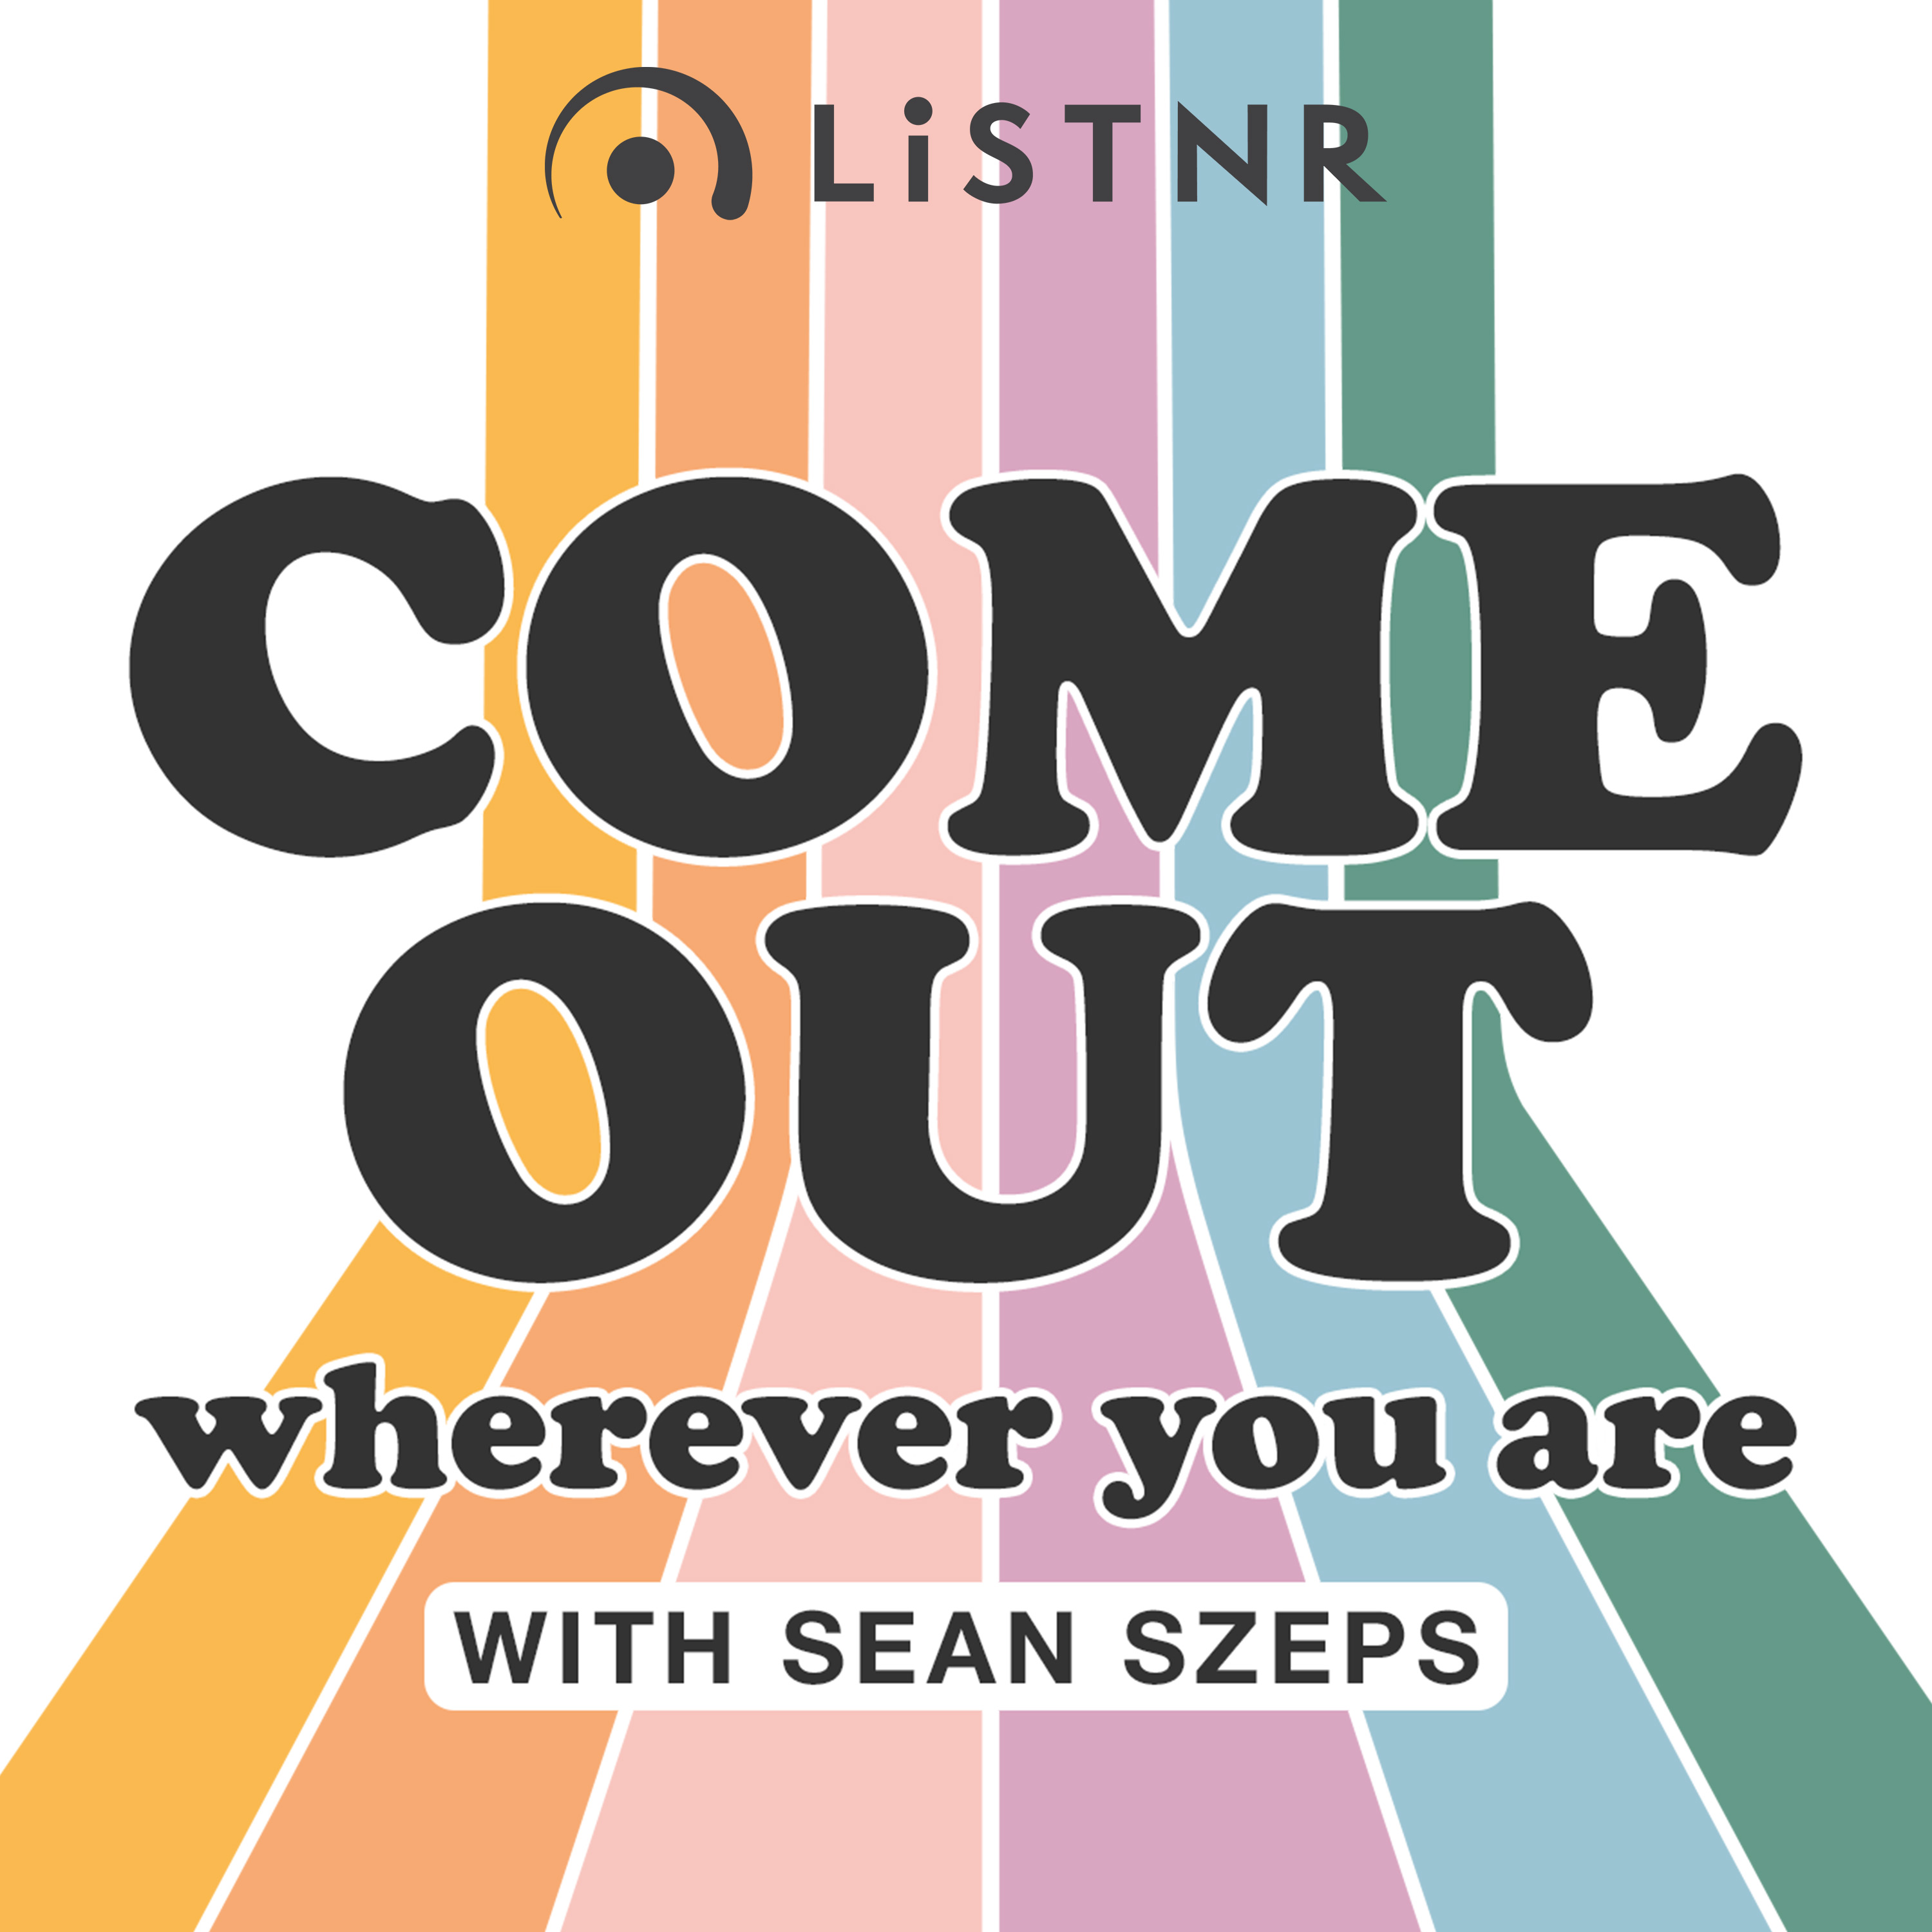 Come Out Wherever You Are with Sean Szeps LiSTNR